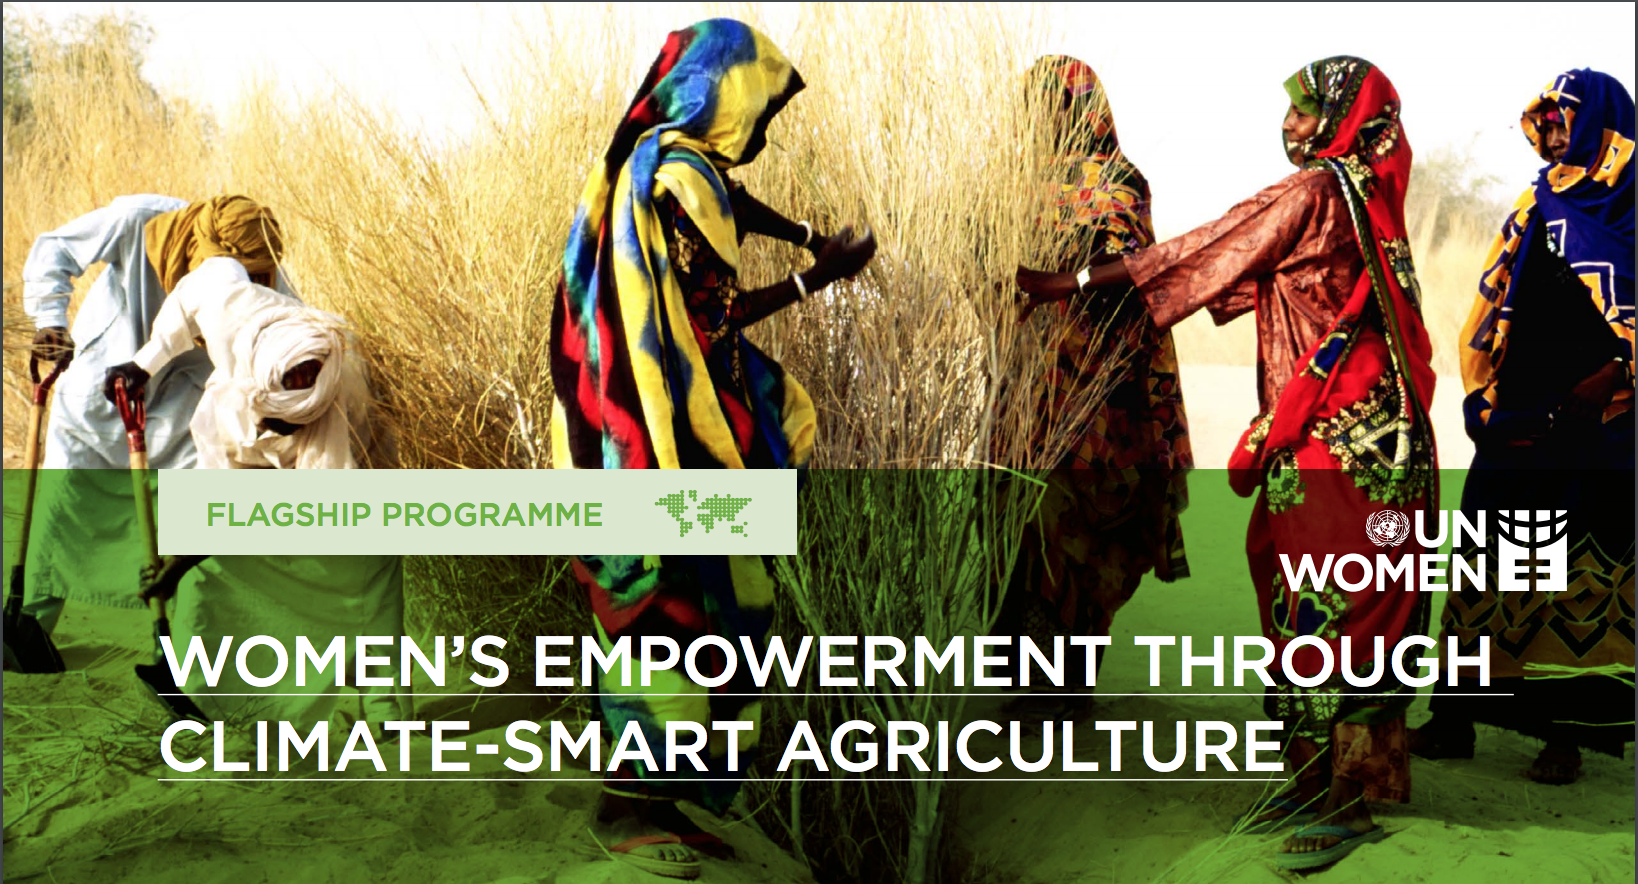 Women's empowerment through climate-resilient agriculture